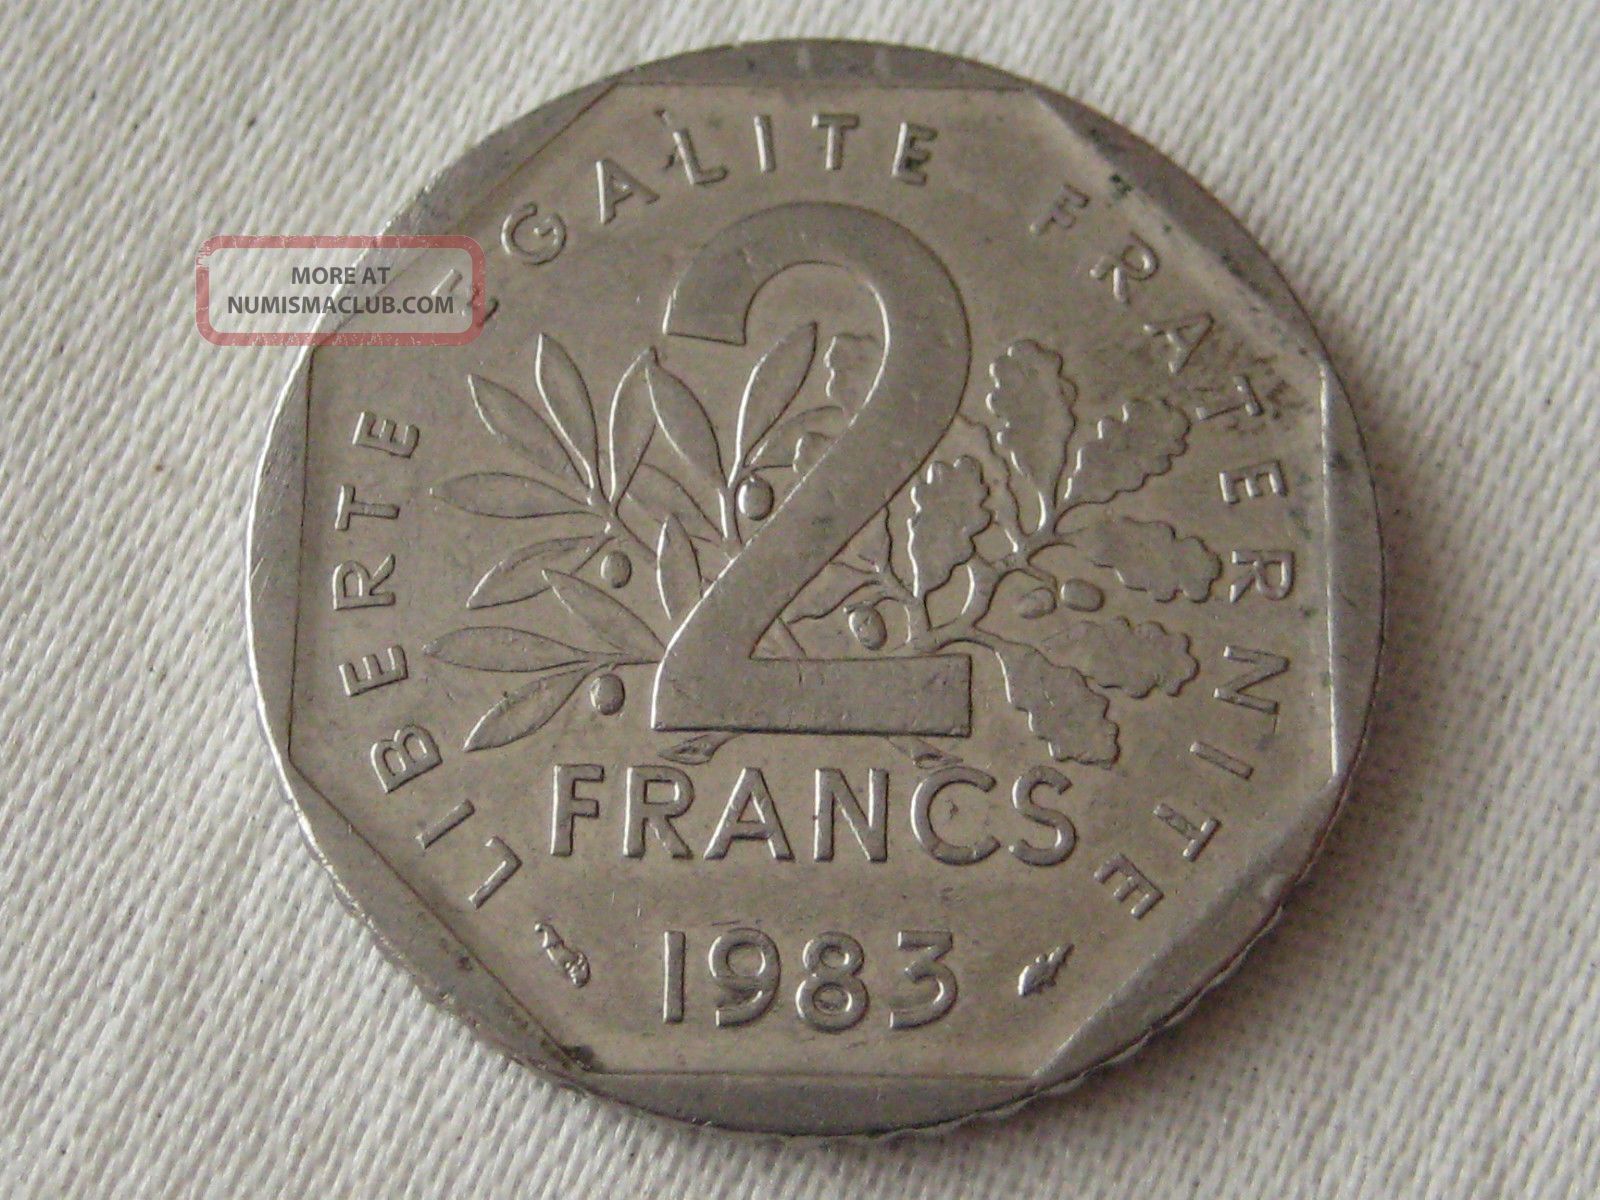 1983 France 2 Francs World Coin,  Nickel,  Seed Sower,  D.  Apres,  O.  Roty Europe photo